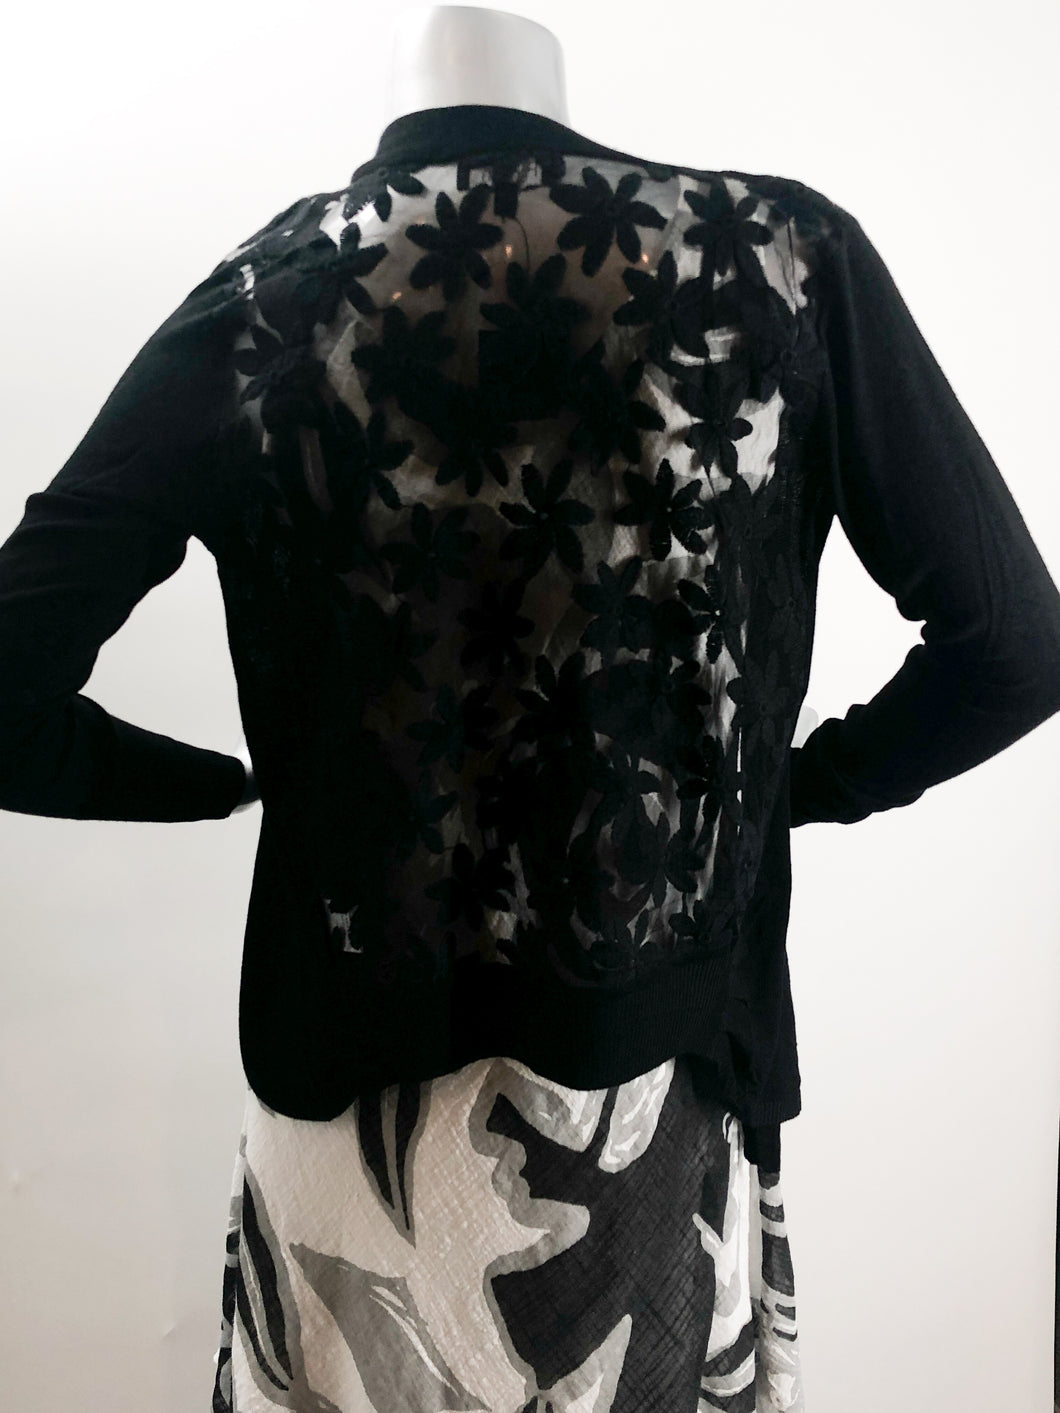 Not your ordinary cardigan, this delightful lightweight cardigan is one that you will wear again and again.  With its sheer black back and shoulder panels with black raised flowers, and a waterfall draping on each side, you are sure to receive compliments.  This black, long sleeve cardigan will elevate almost any dress or top in your closet.  Color-Black. Back and shoulder lace panels with raised floral pattern. Waterfall draping design on each side.